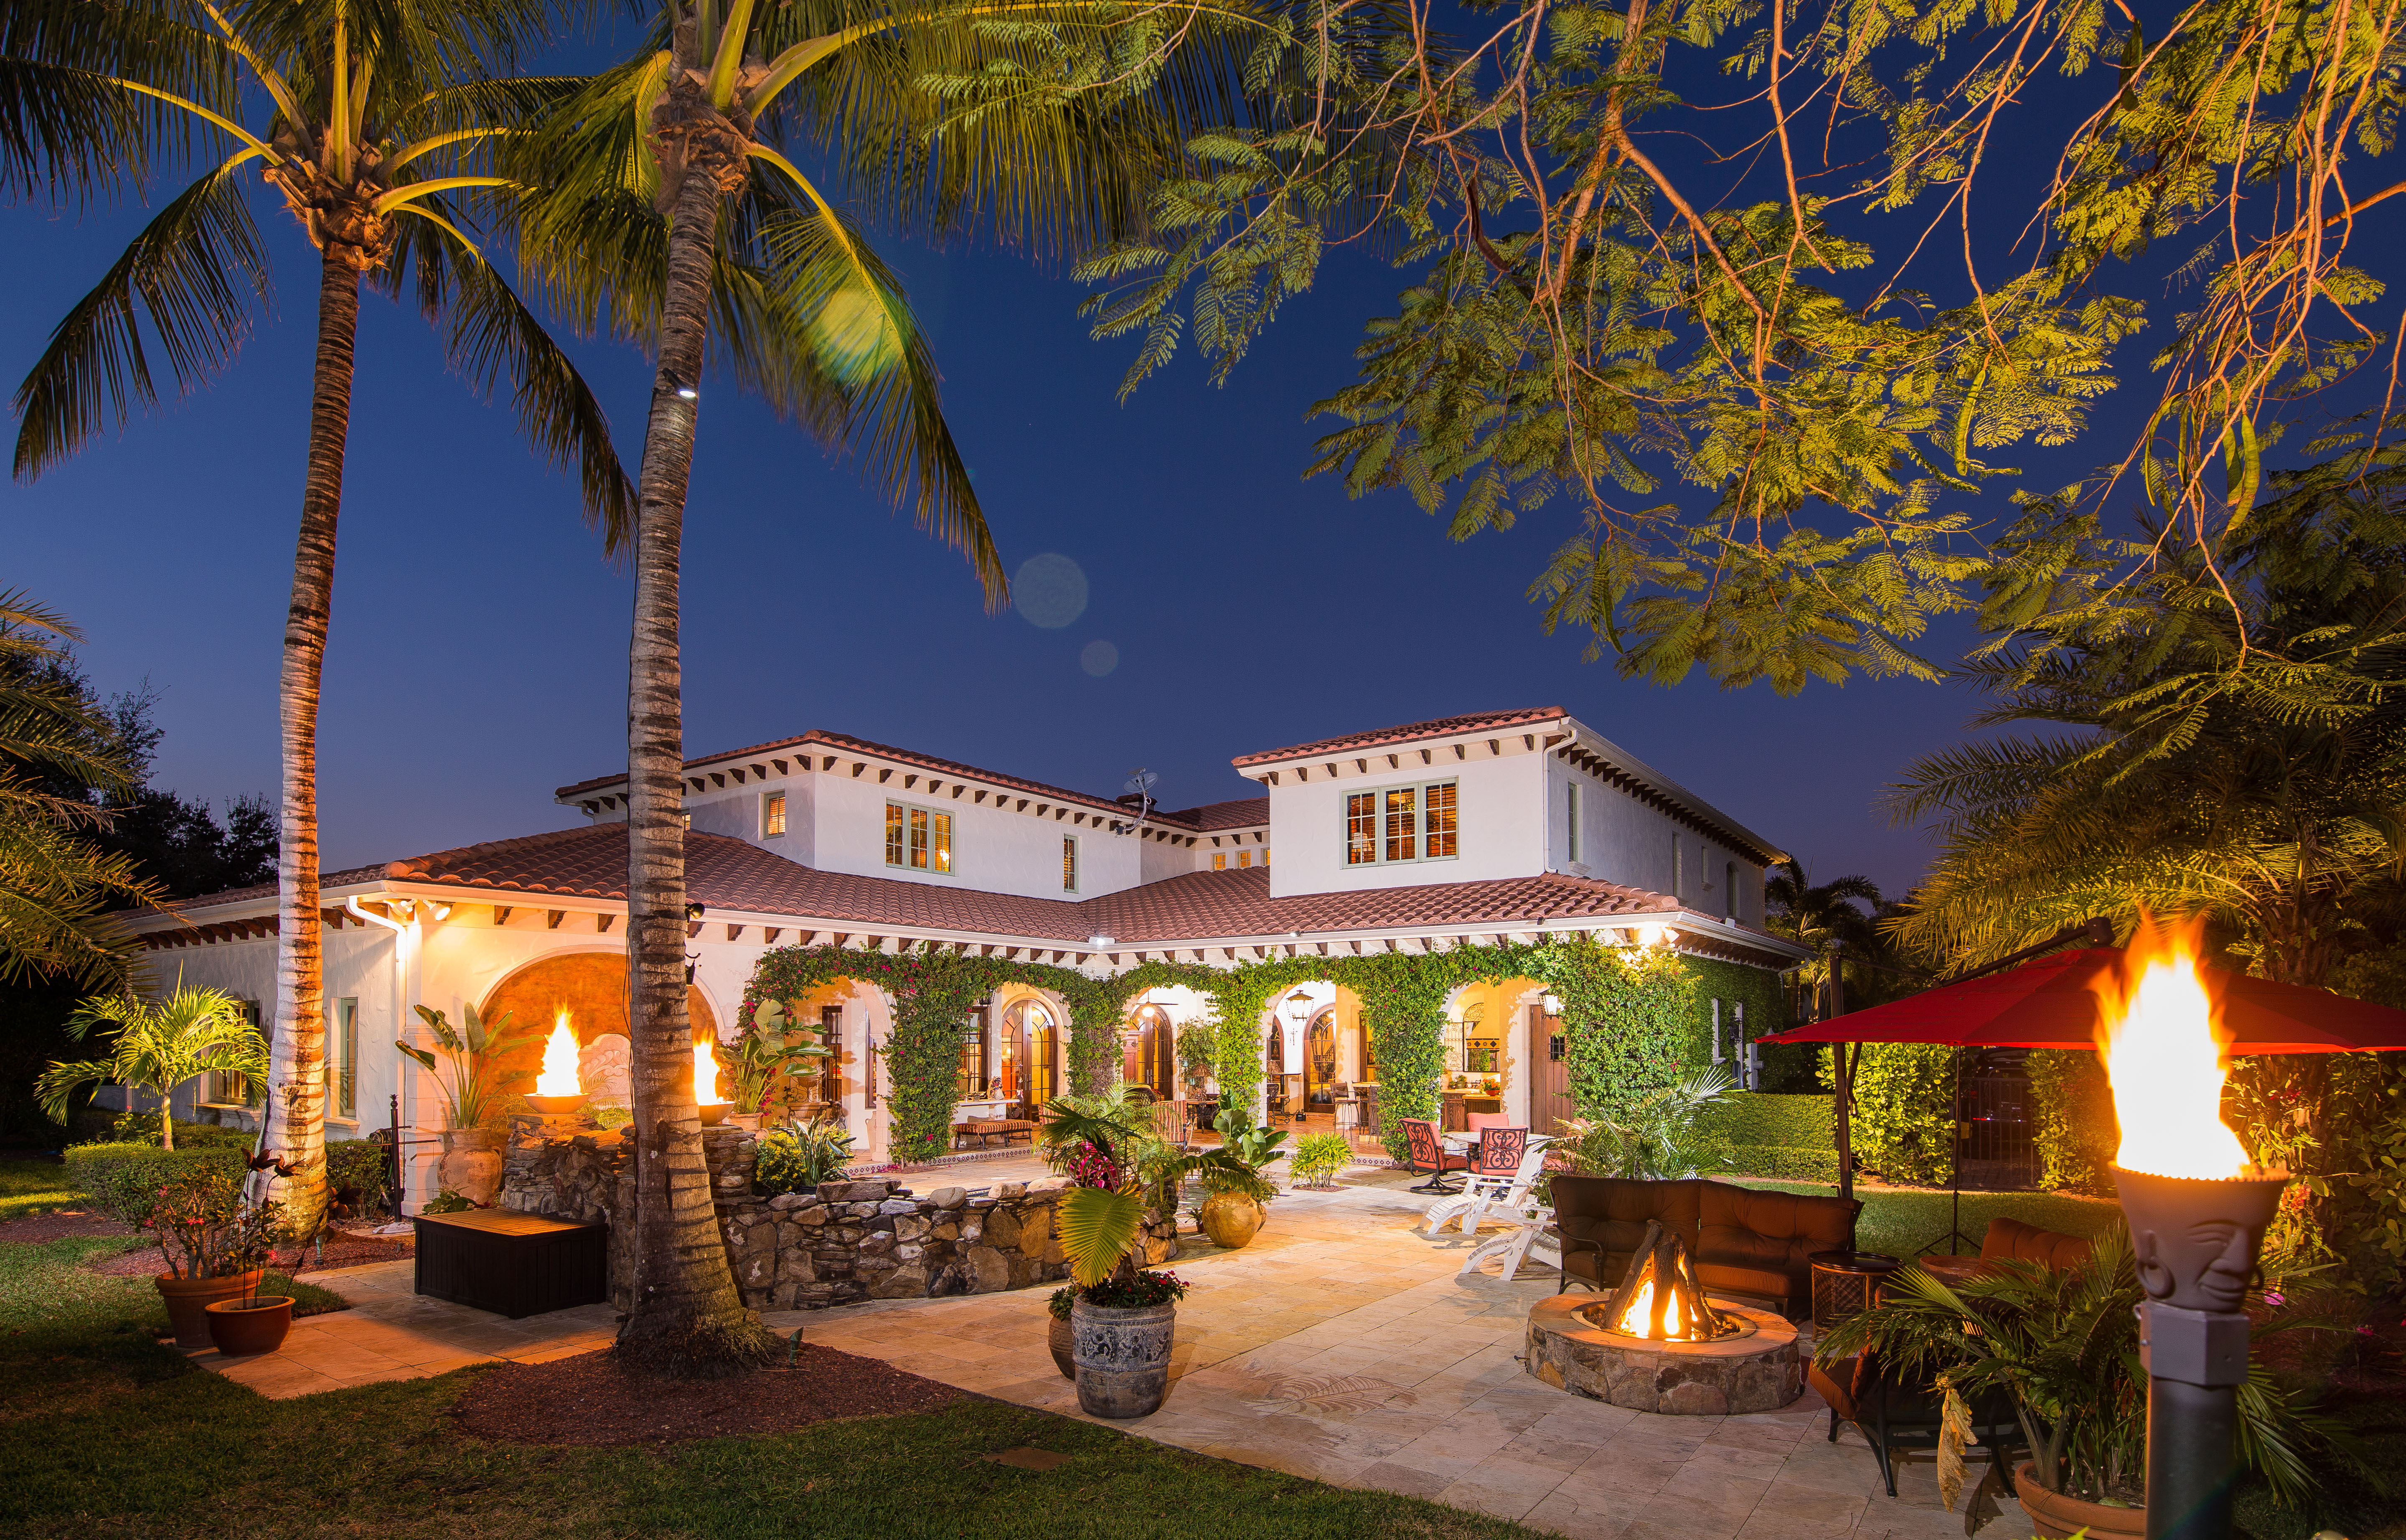 Florida Photography | Residential Real Estate | Steven Martine